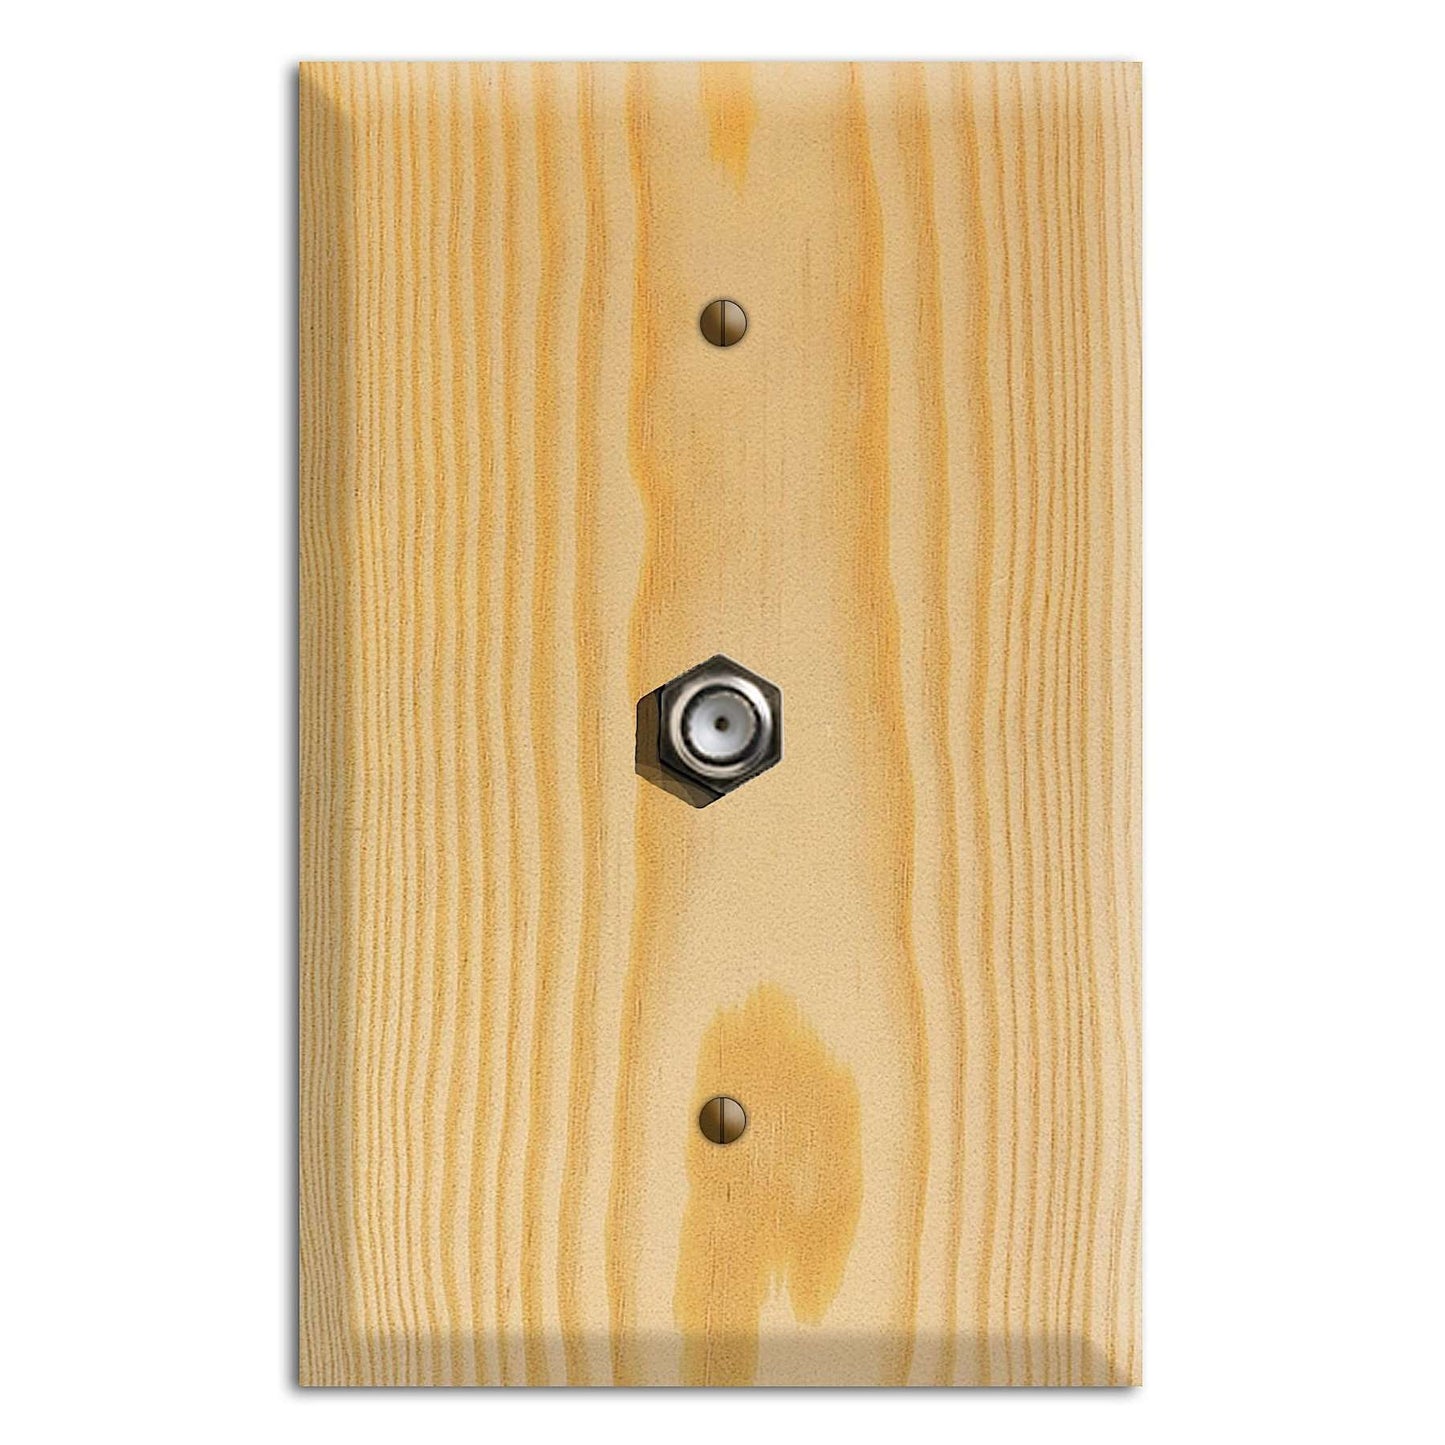 Pine Wood Cable Hardware with Plate:Wallplates.com